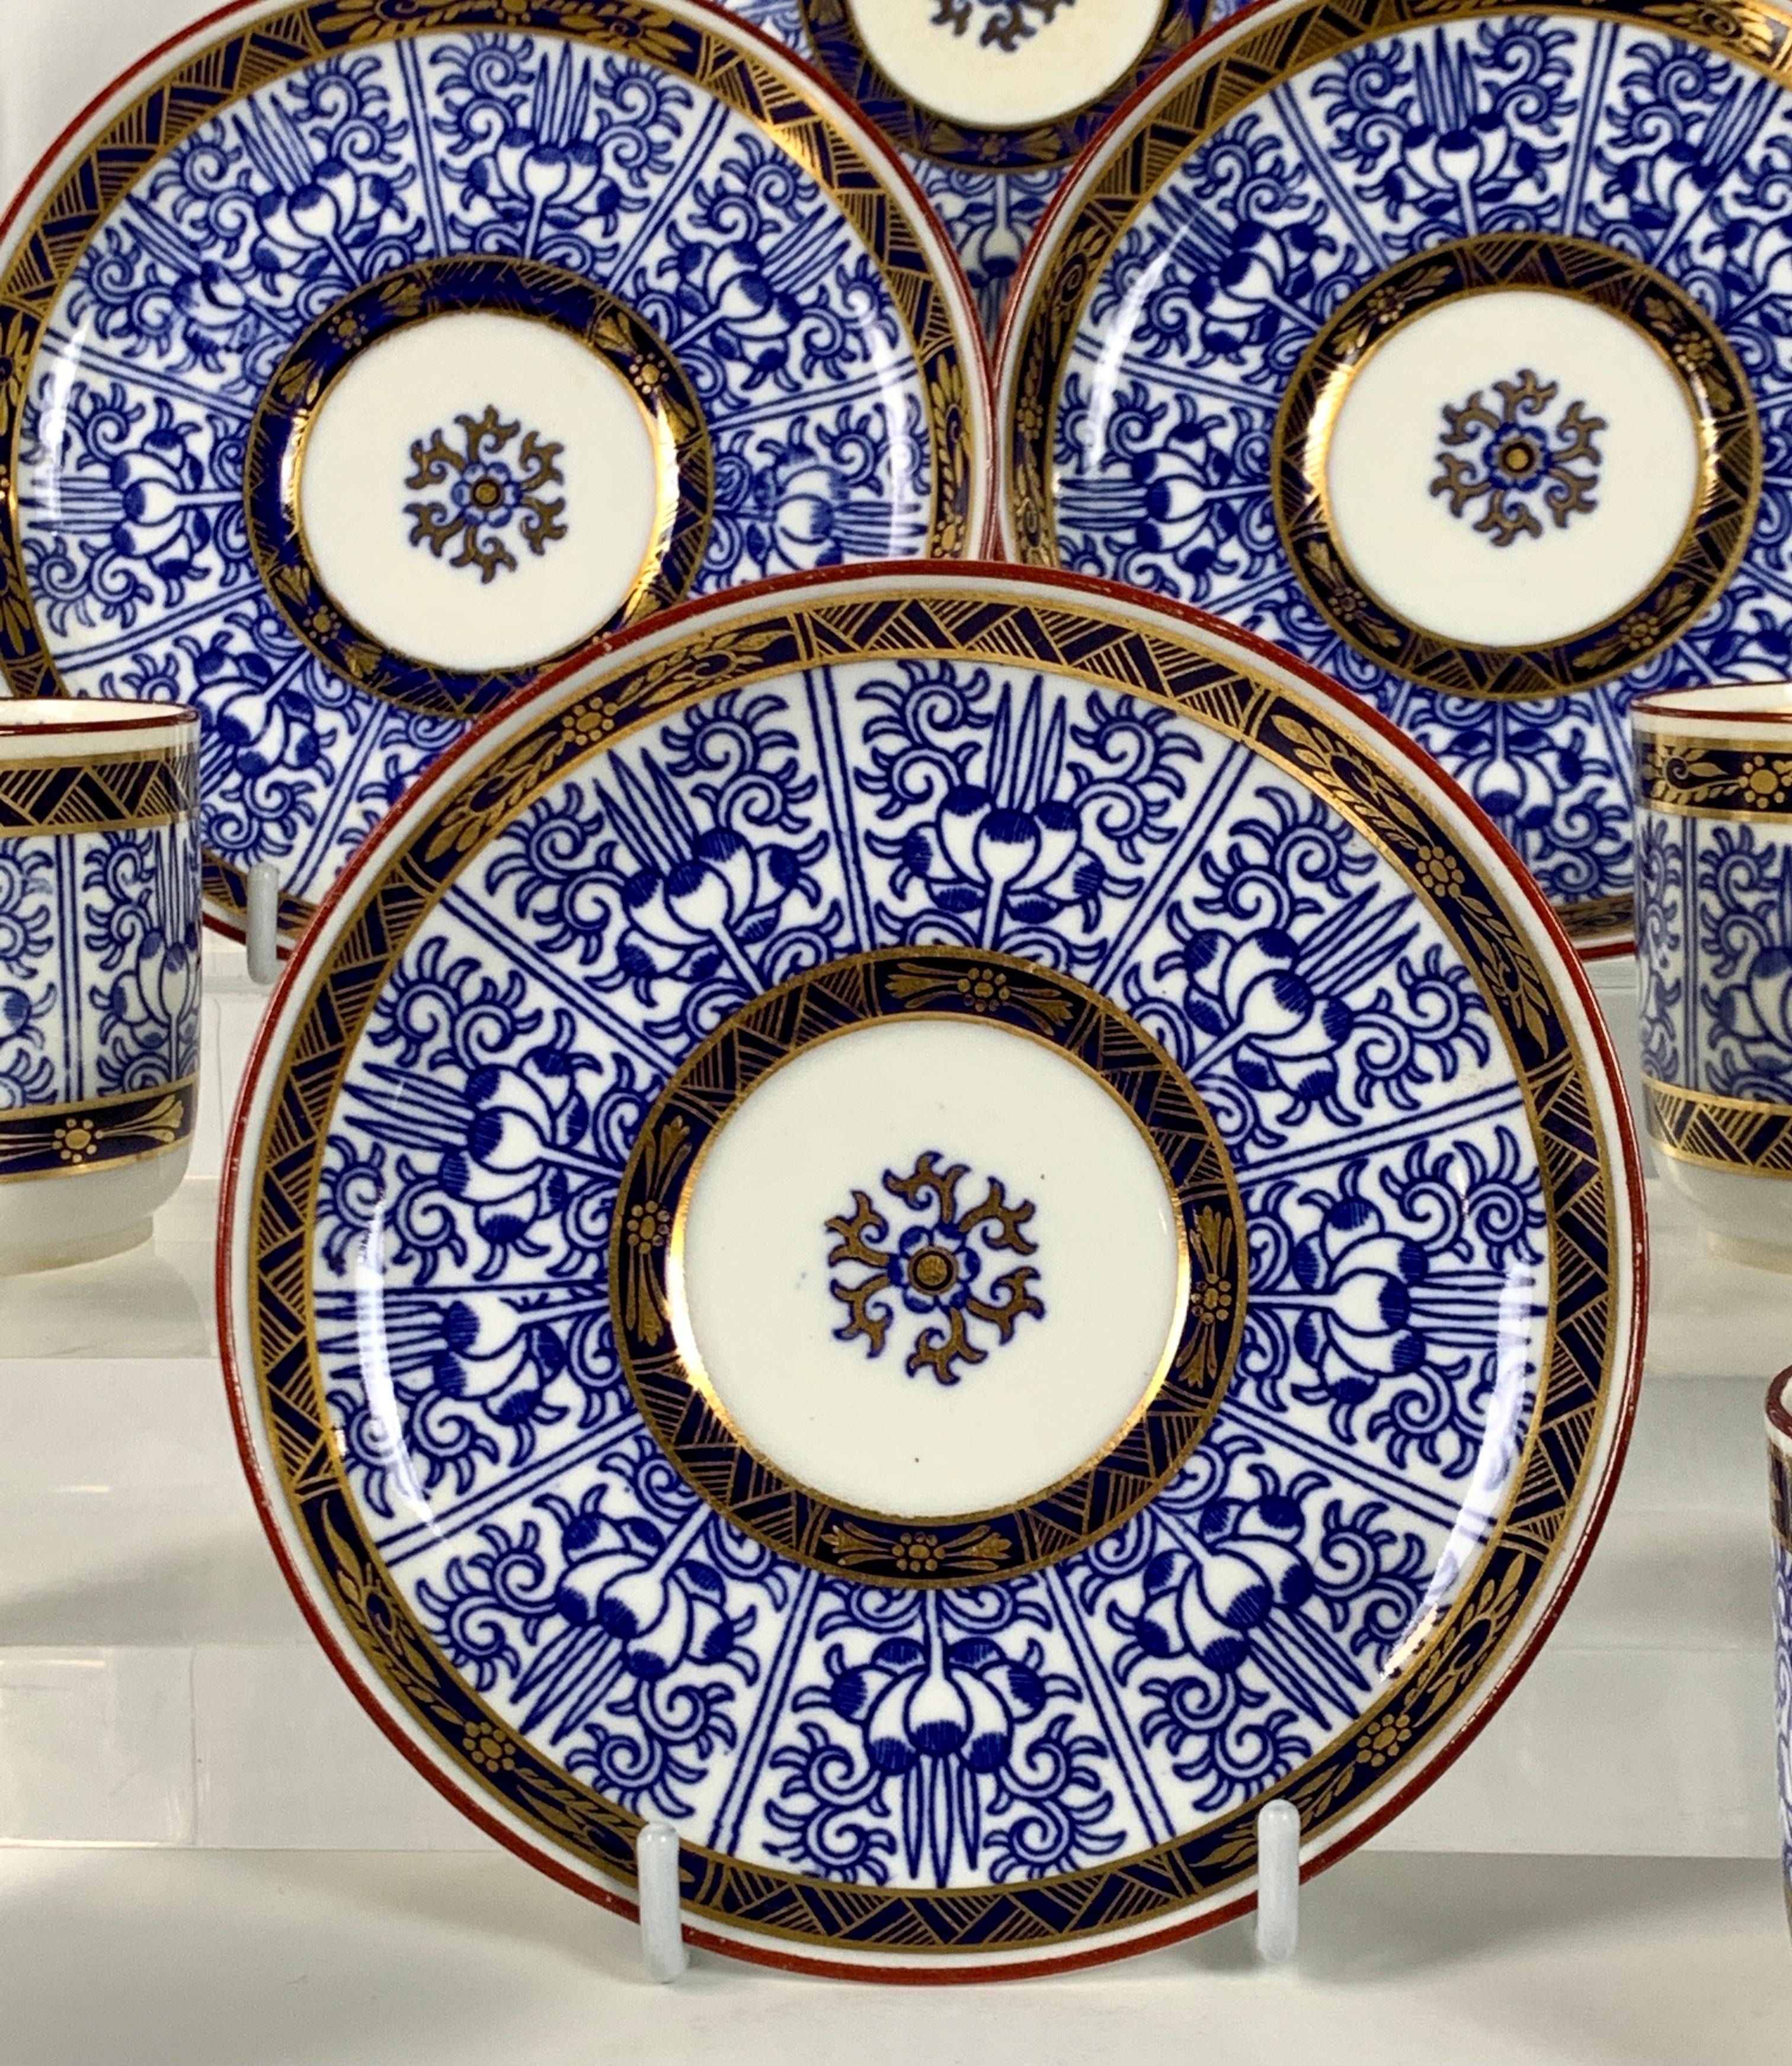 English Demitasse Blue and White Porcelain Cups and Saucers in the Royal Lily Pattern